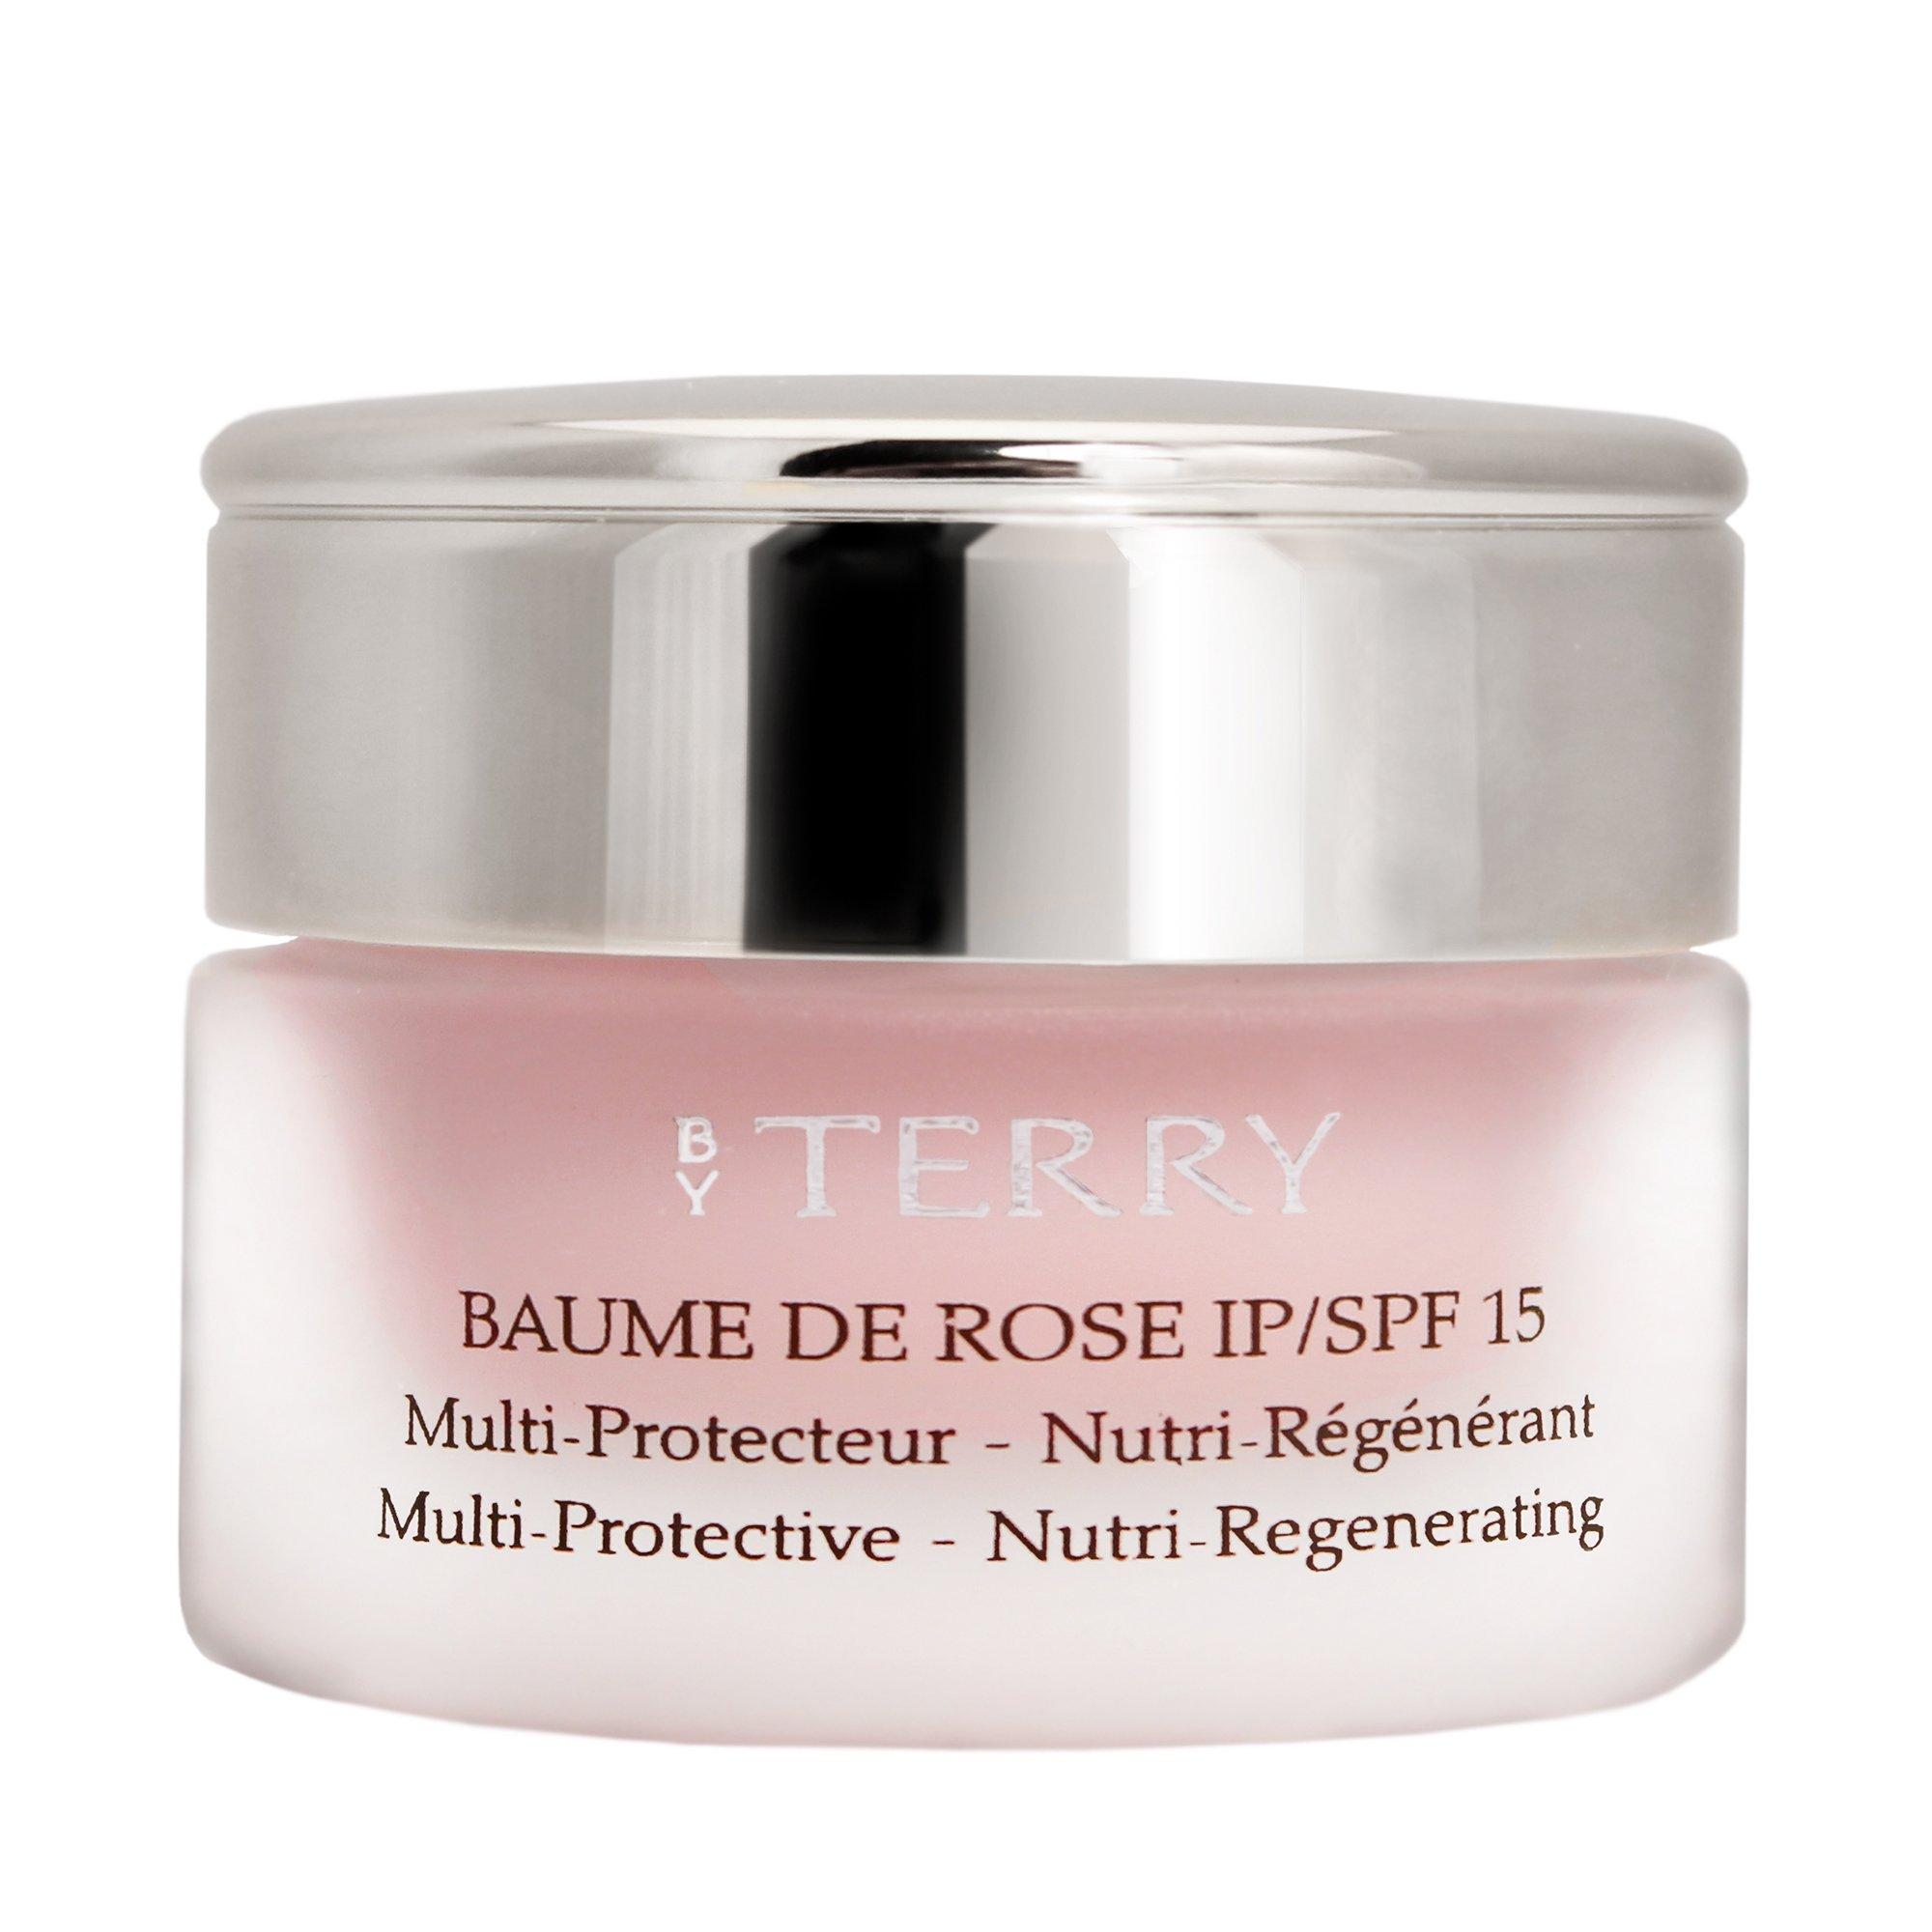 Image of BY TERRY Baume de Rose - 10g